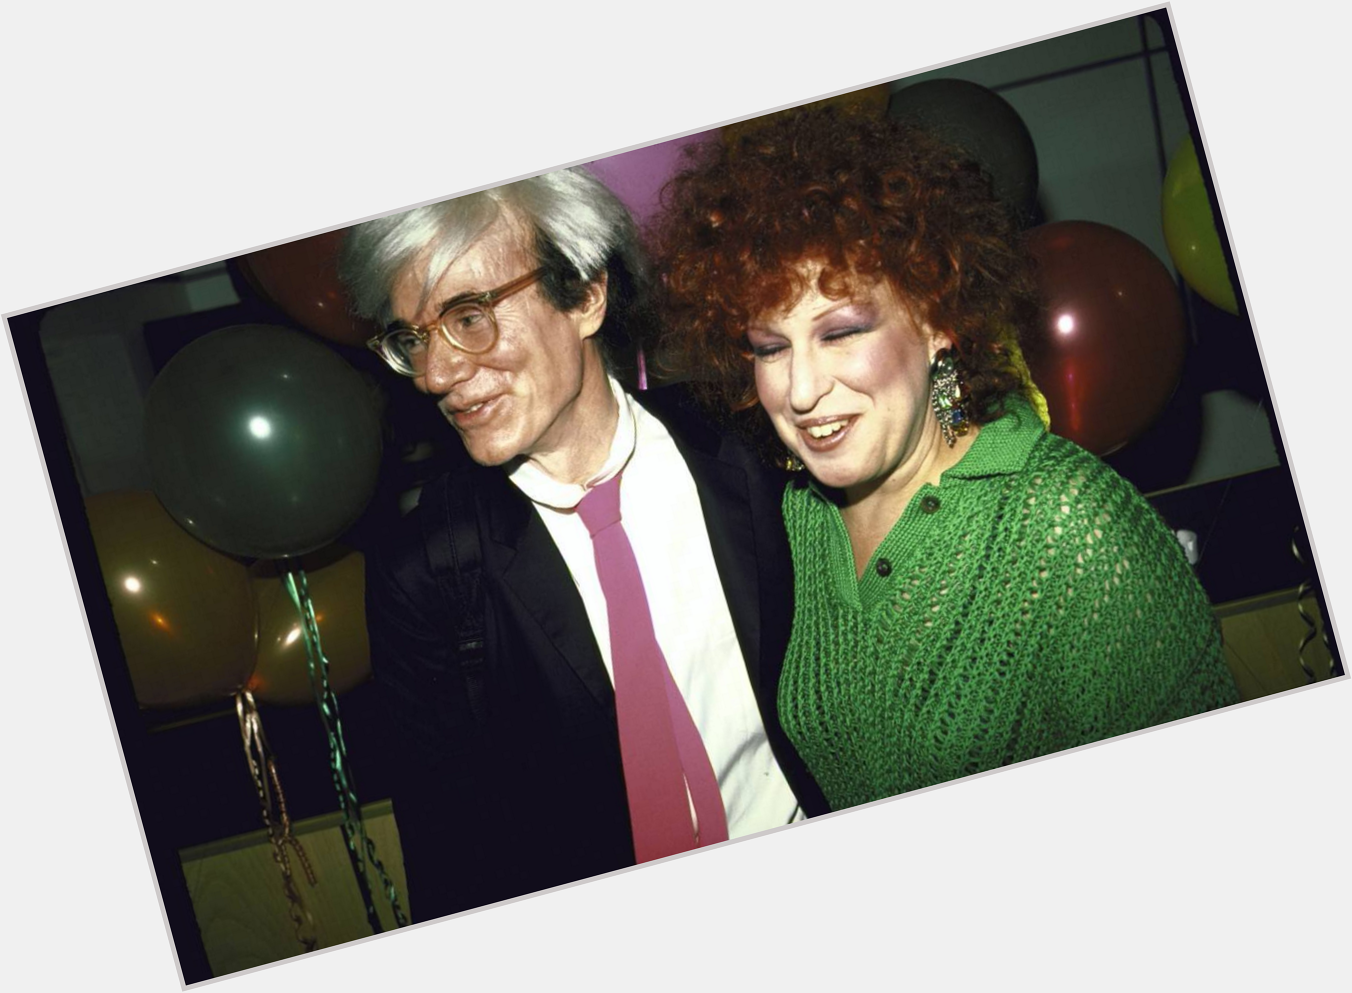 \"I\m working my way toward divinity.\" Happy birthday, Bette Midler. Here she is with Andy Warhol in 1984 